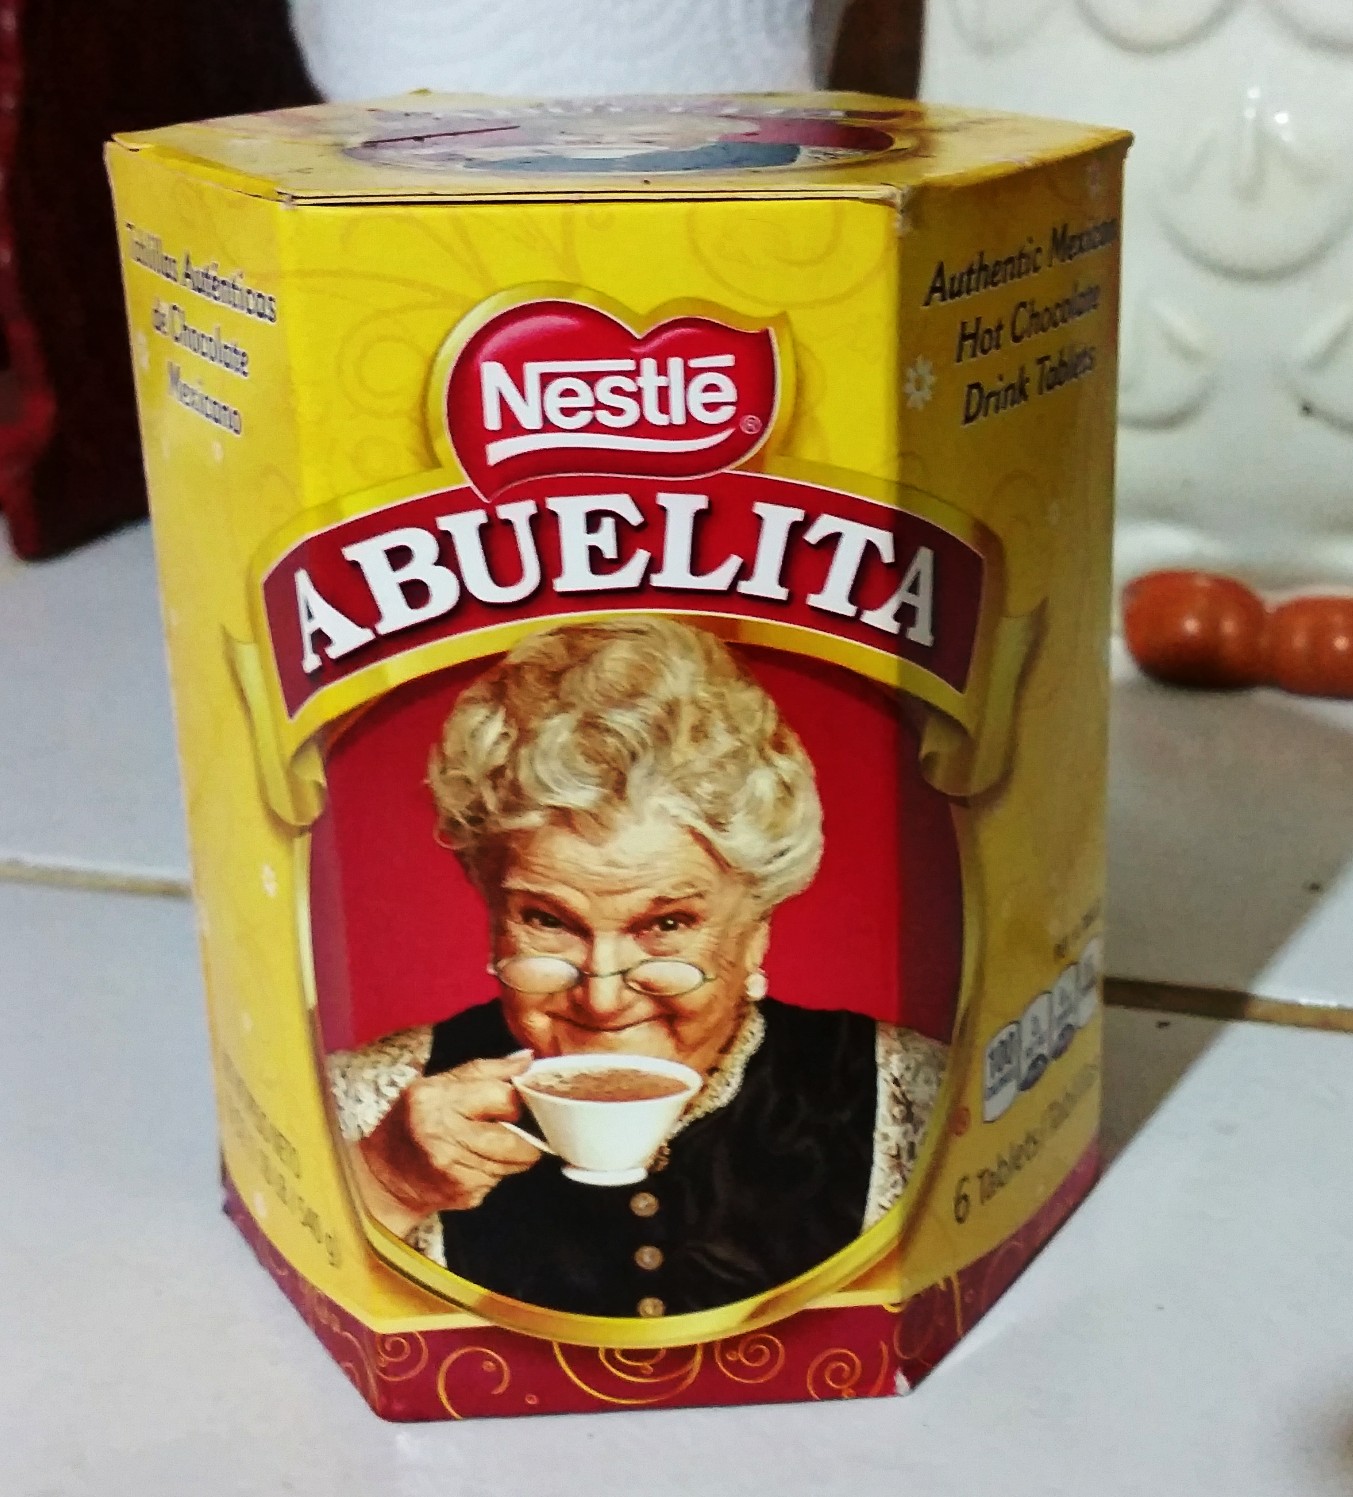 Indecisively Restless ABUELITA Chocolate Cake with a Kick